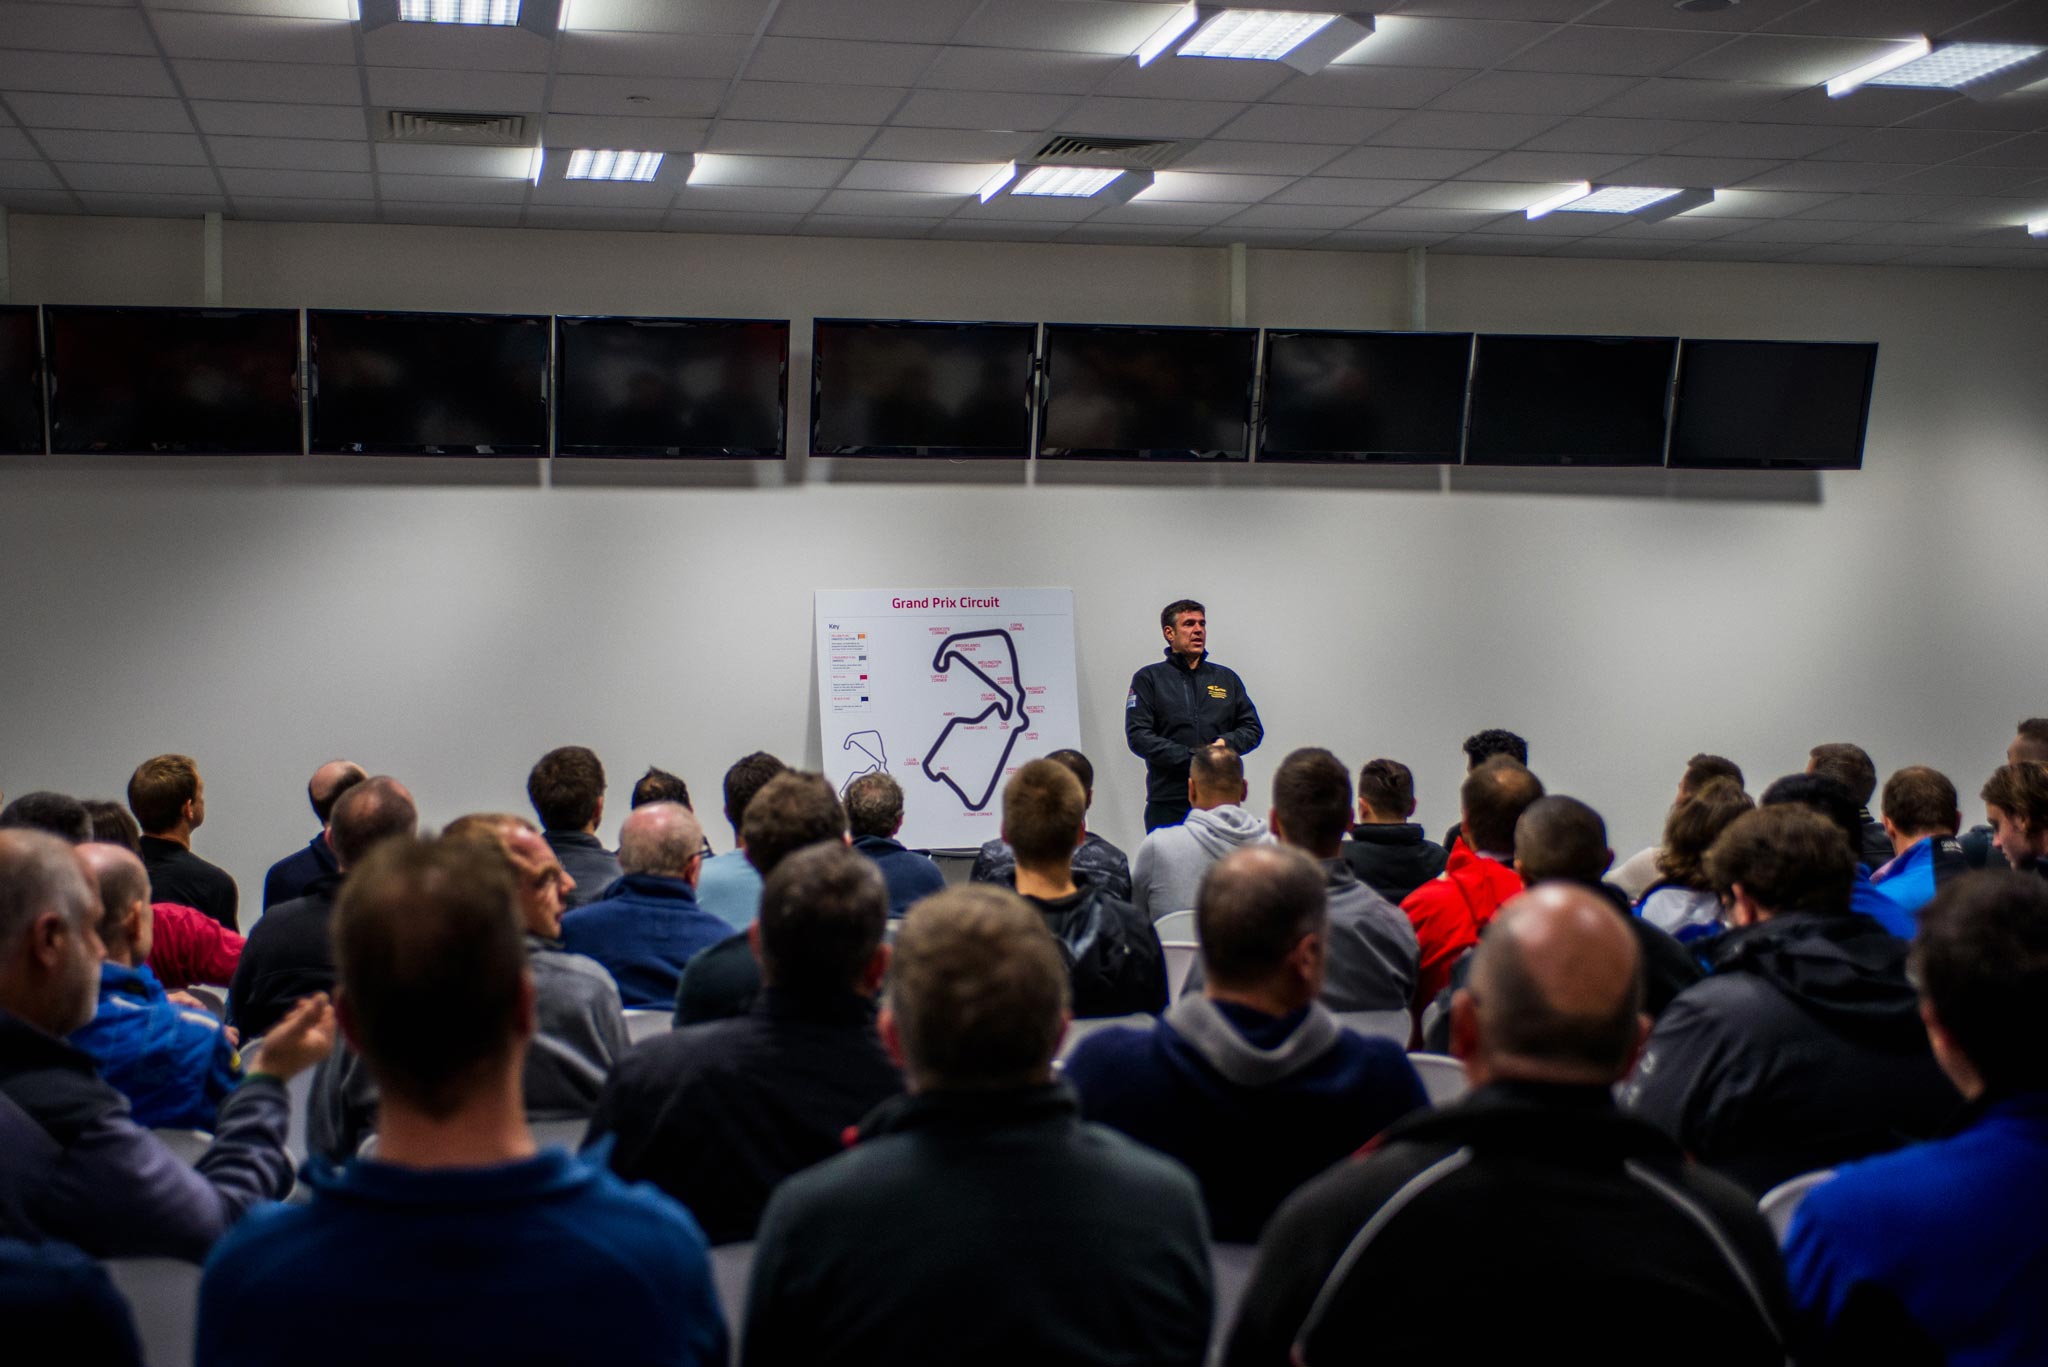 A scene captured at a corporate event briefing room, where drivers gather to prepare for an exciting day at Silverstone race track. A man stands at the front, showing a map to a large audience of drivers, briefing them about track rules and the day's race, expertly documented by Wright Content.